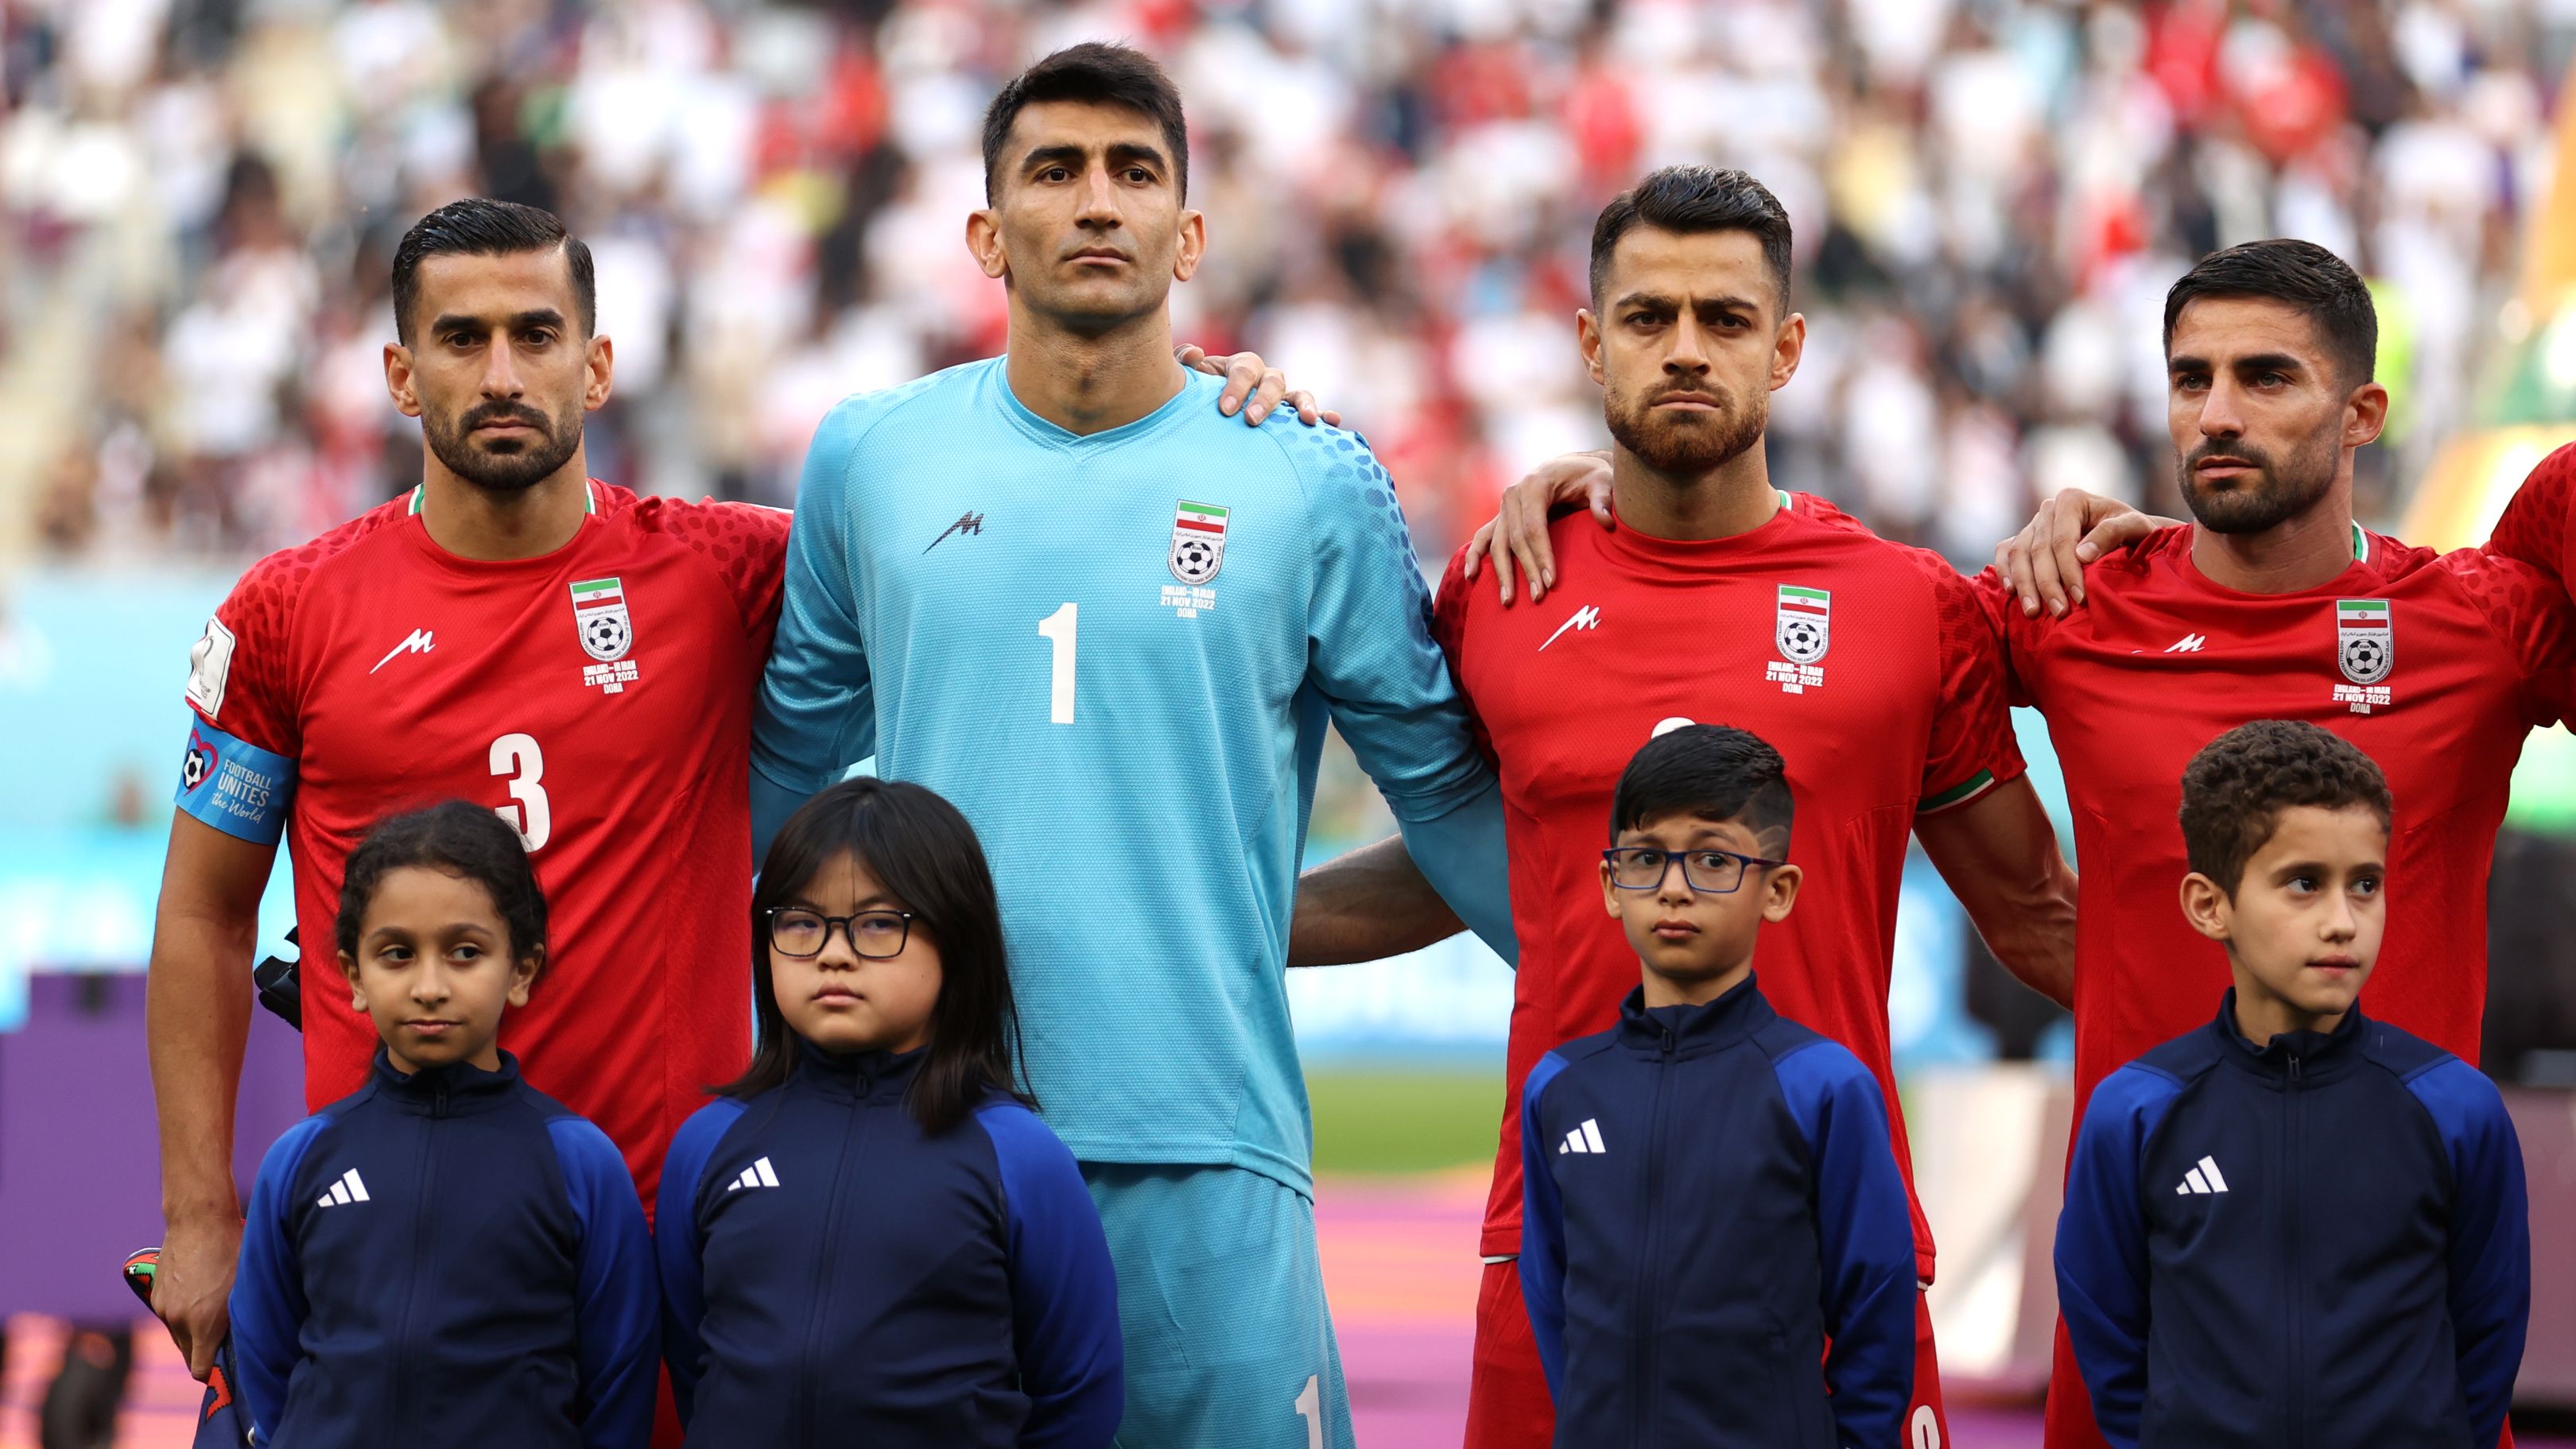 DOHA, QATAR - NOVEMBER 21: Iran players line up for the national anthem prior to the FIFA World Cup Qatar 2022 Group B match between England and IR Iran at Khalifa International Stadium on November 21, 2022 in Doha, Qatar. (Photo by Julian Finney/Getty Images)